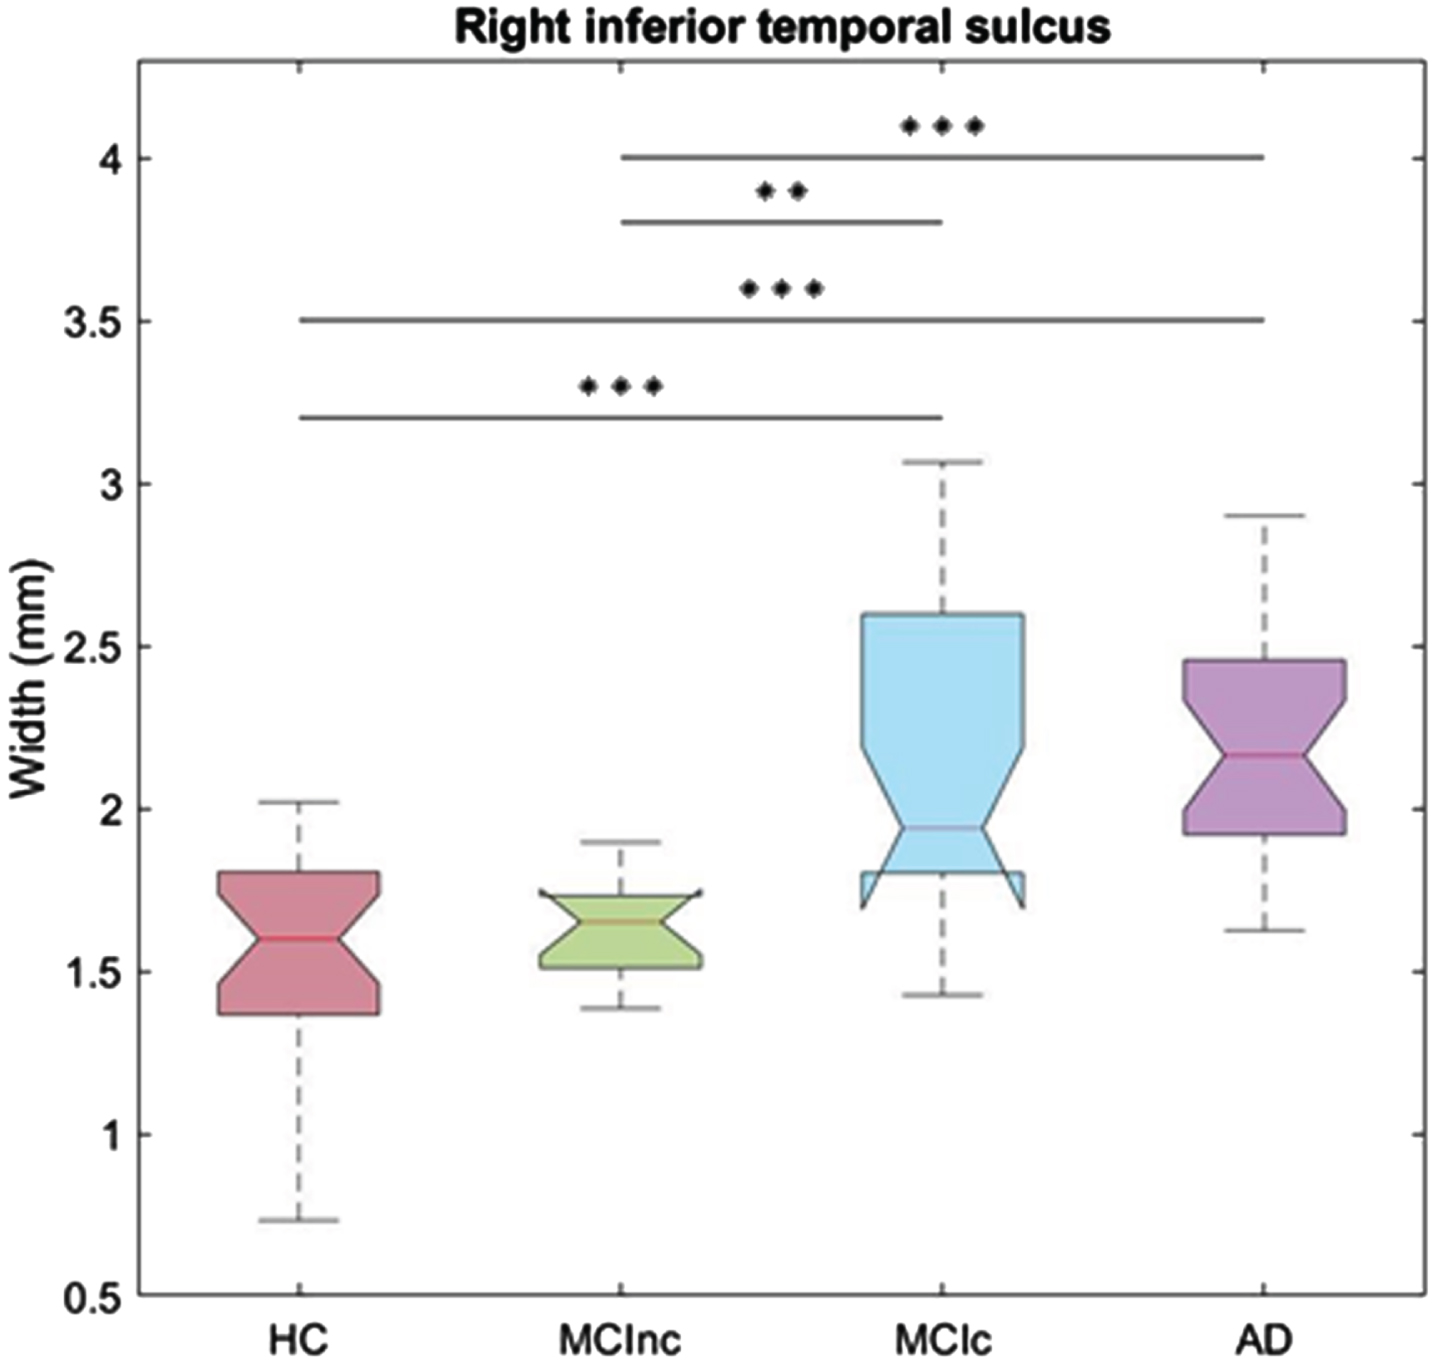 Boxplot of the width of the right inferior temporal sulcus across the four groups. The feature evidently differentiates HC and MCI nc from AD and MCIc. **p < 0.01; ***p < 0.001. HC, healthy controls; MCInc, non-converter MCI; MCIc, converter MCI; AD, Alzheimer’s disease.